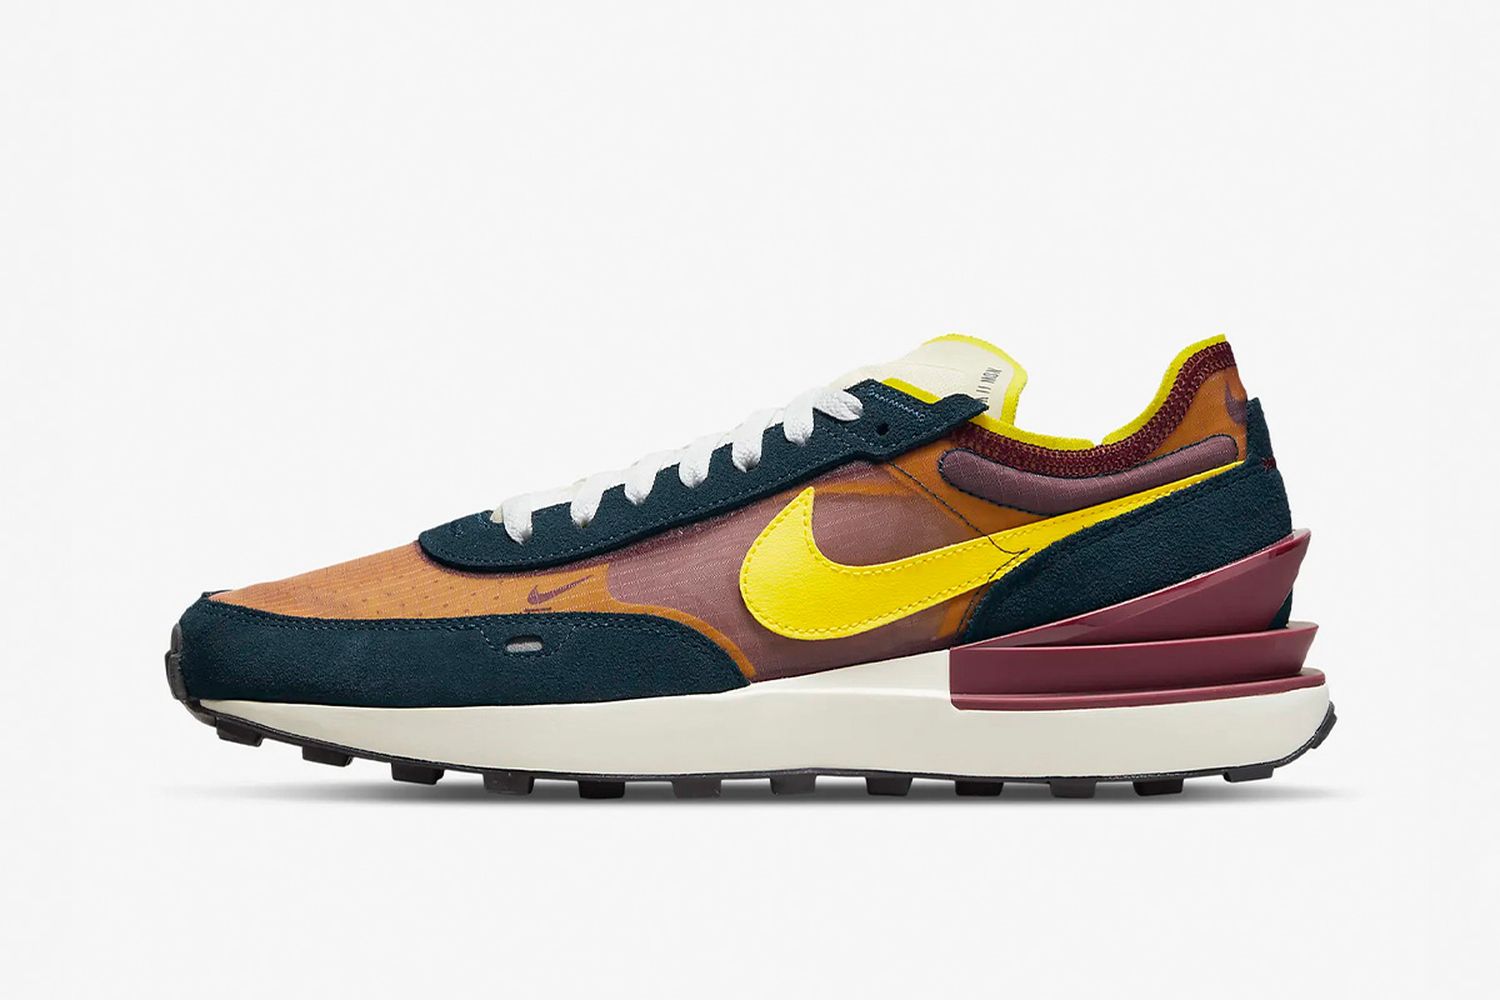 Shop 10 the Retro Nike Sneakers for